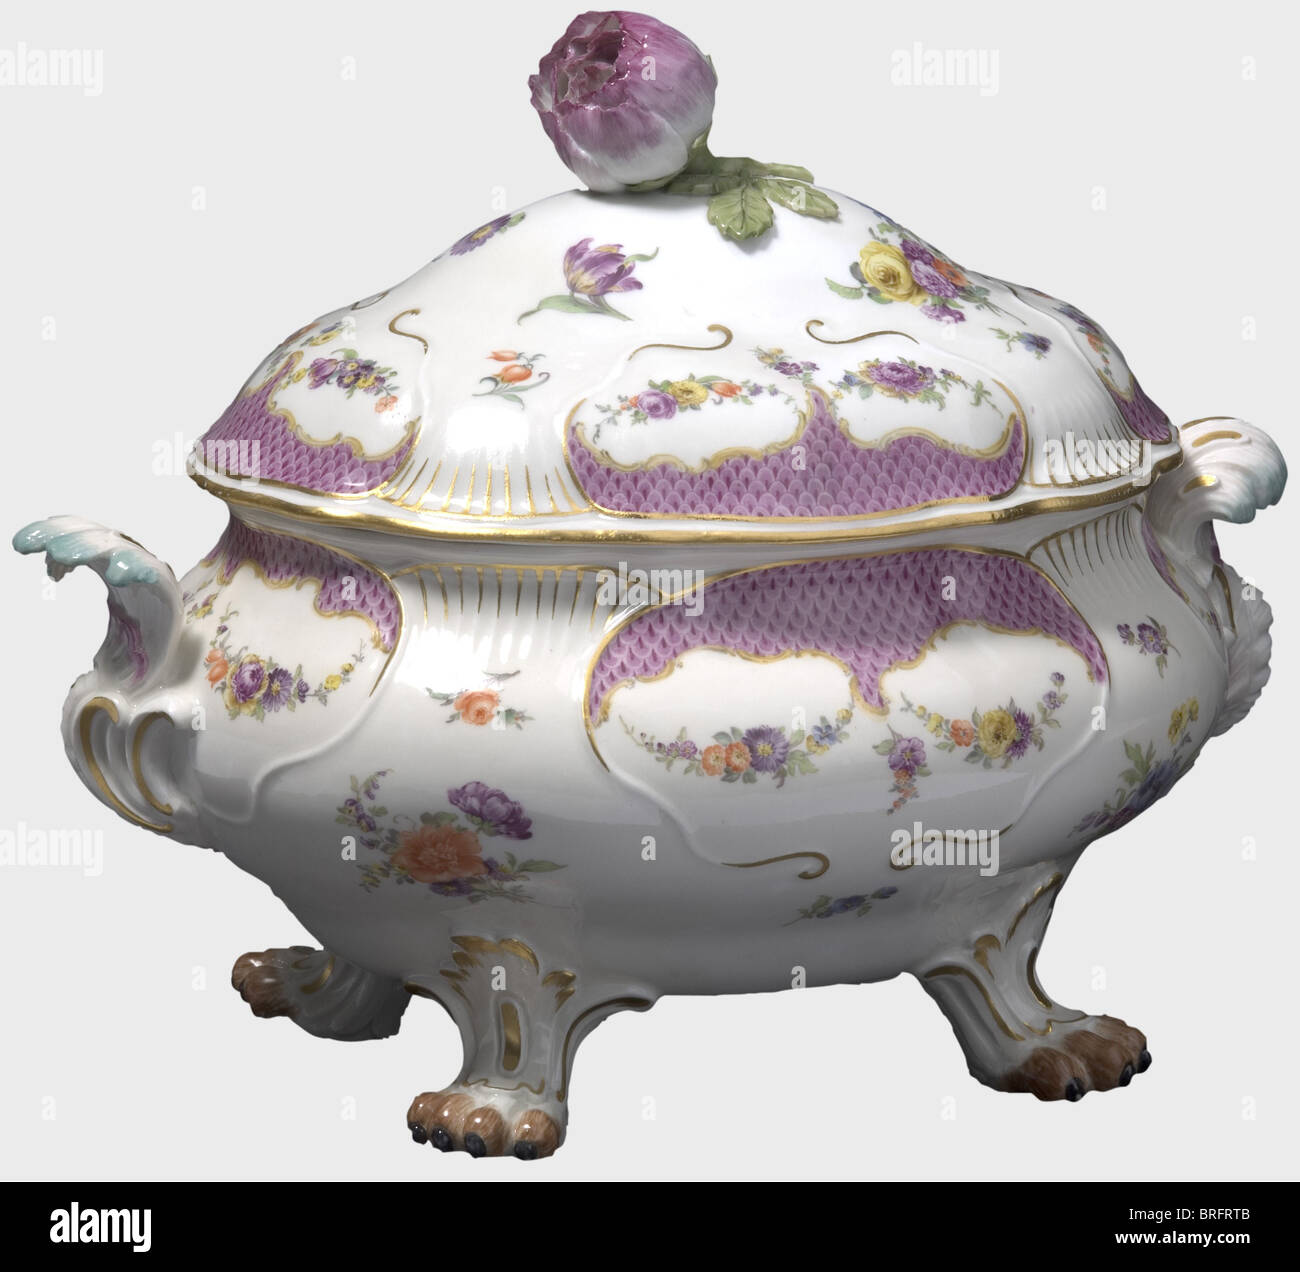 Friedrich II - Count Kurt Christoph von Schwerin(1684 - 1757),a covered porcelain terrine,Meissen,circa 1746/50. Rococo terrine on four animal paws,with rocaille handles,lid handle in the shape of a rose,hand-painted decorative flowers in colour,and a surrounding purple-coloured,scalloped rim. The service was a gift from Frederick the Great to his Field Marshal Schwerin. The occasion is so far unknown,however,it may perhaps be dated to 1754. Underglaze sword mark on the bottom. 30 x 26 x 22 cm. historic,historical,18th century,Prussian,Prussia,G,Additional-Rights-Clearences-Not Available Stock Photo